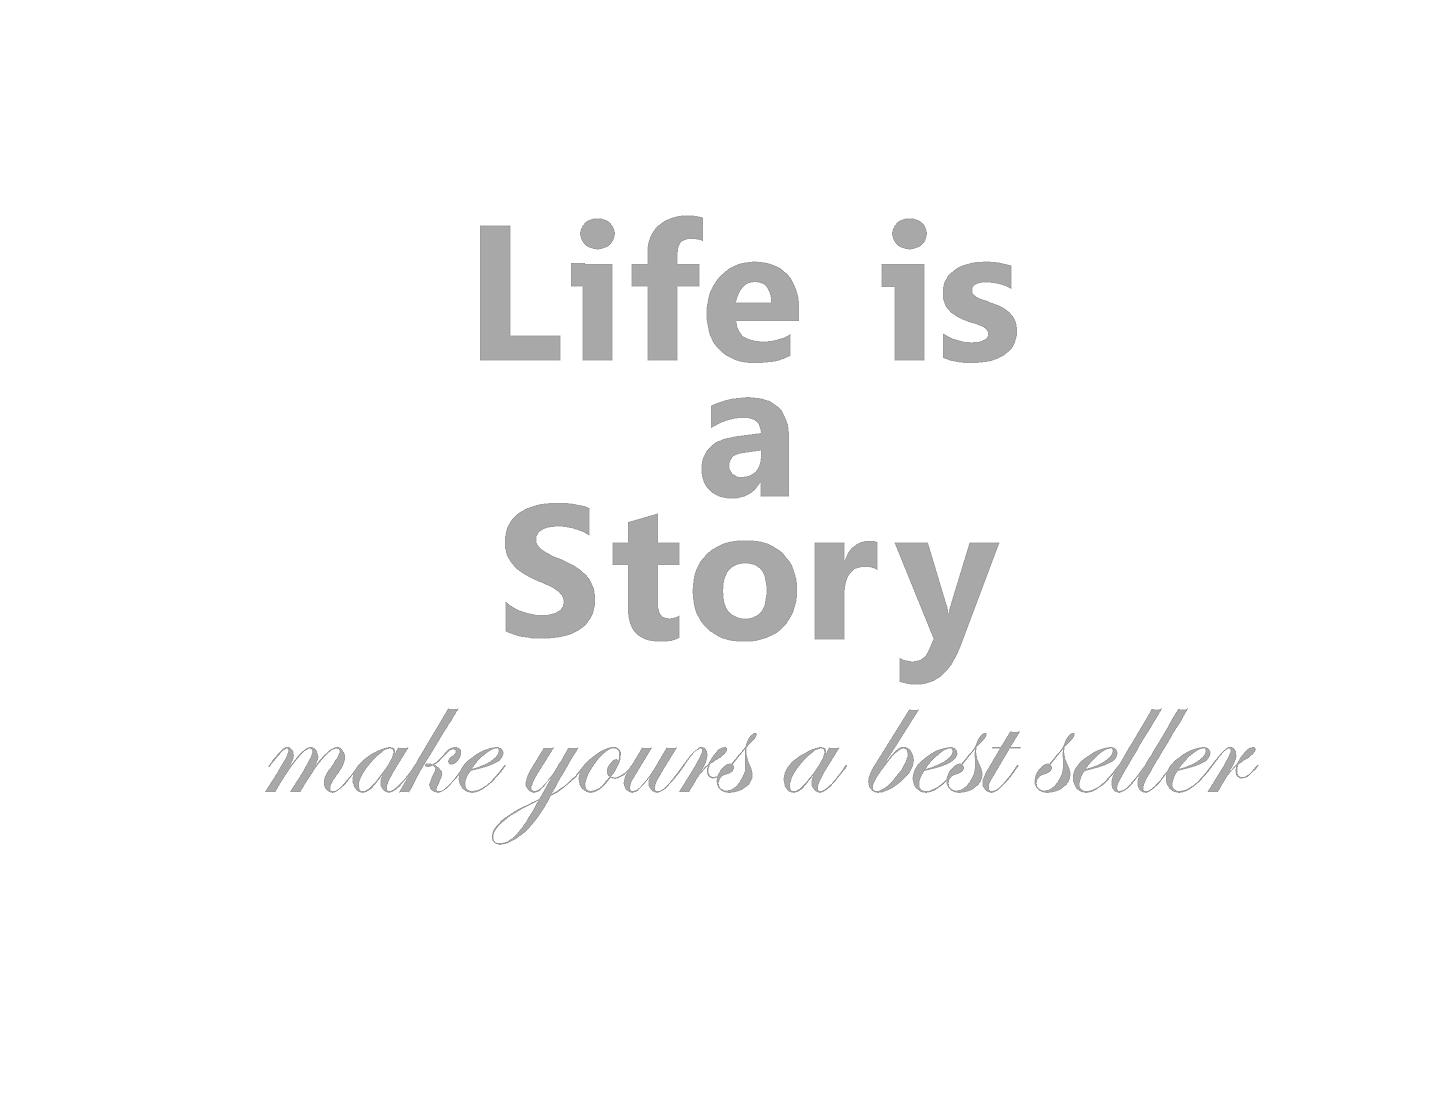 Life is a story